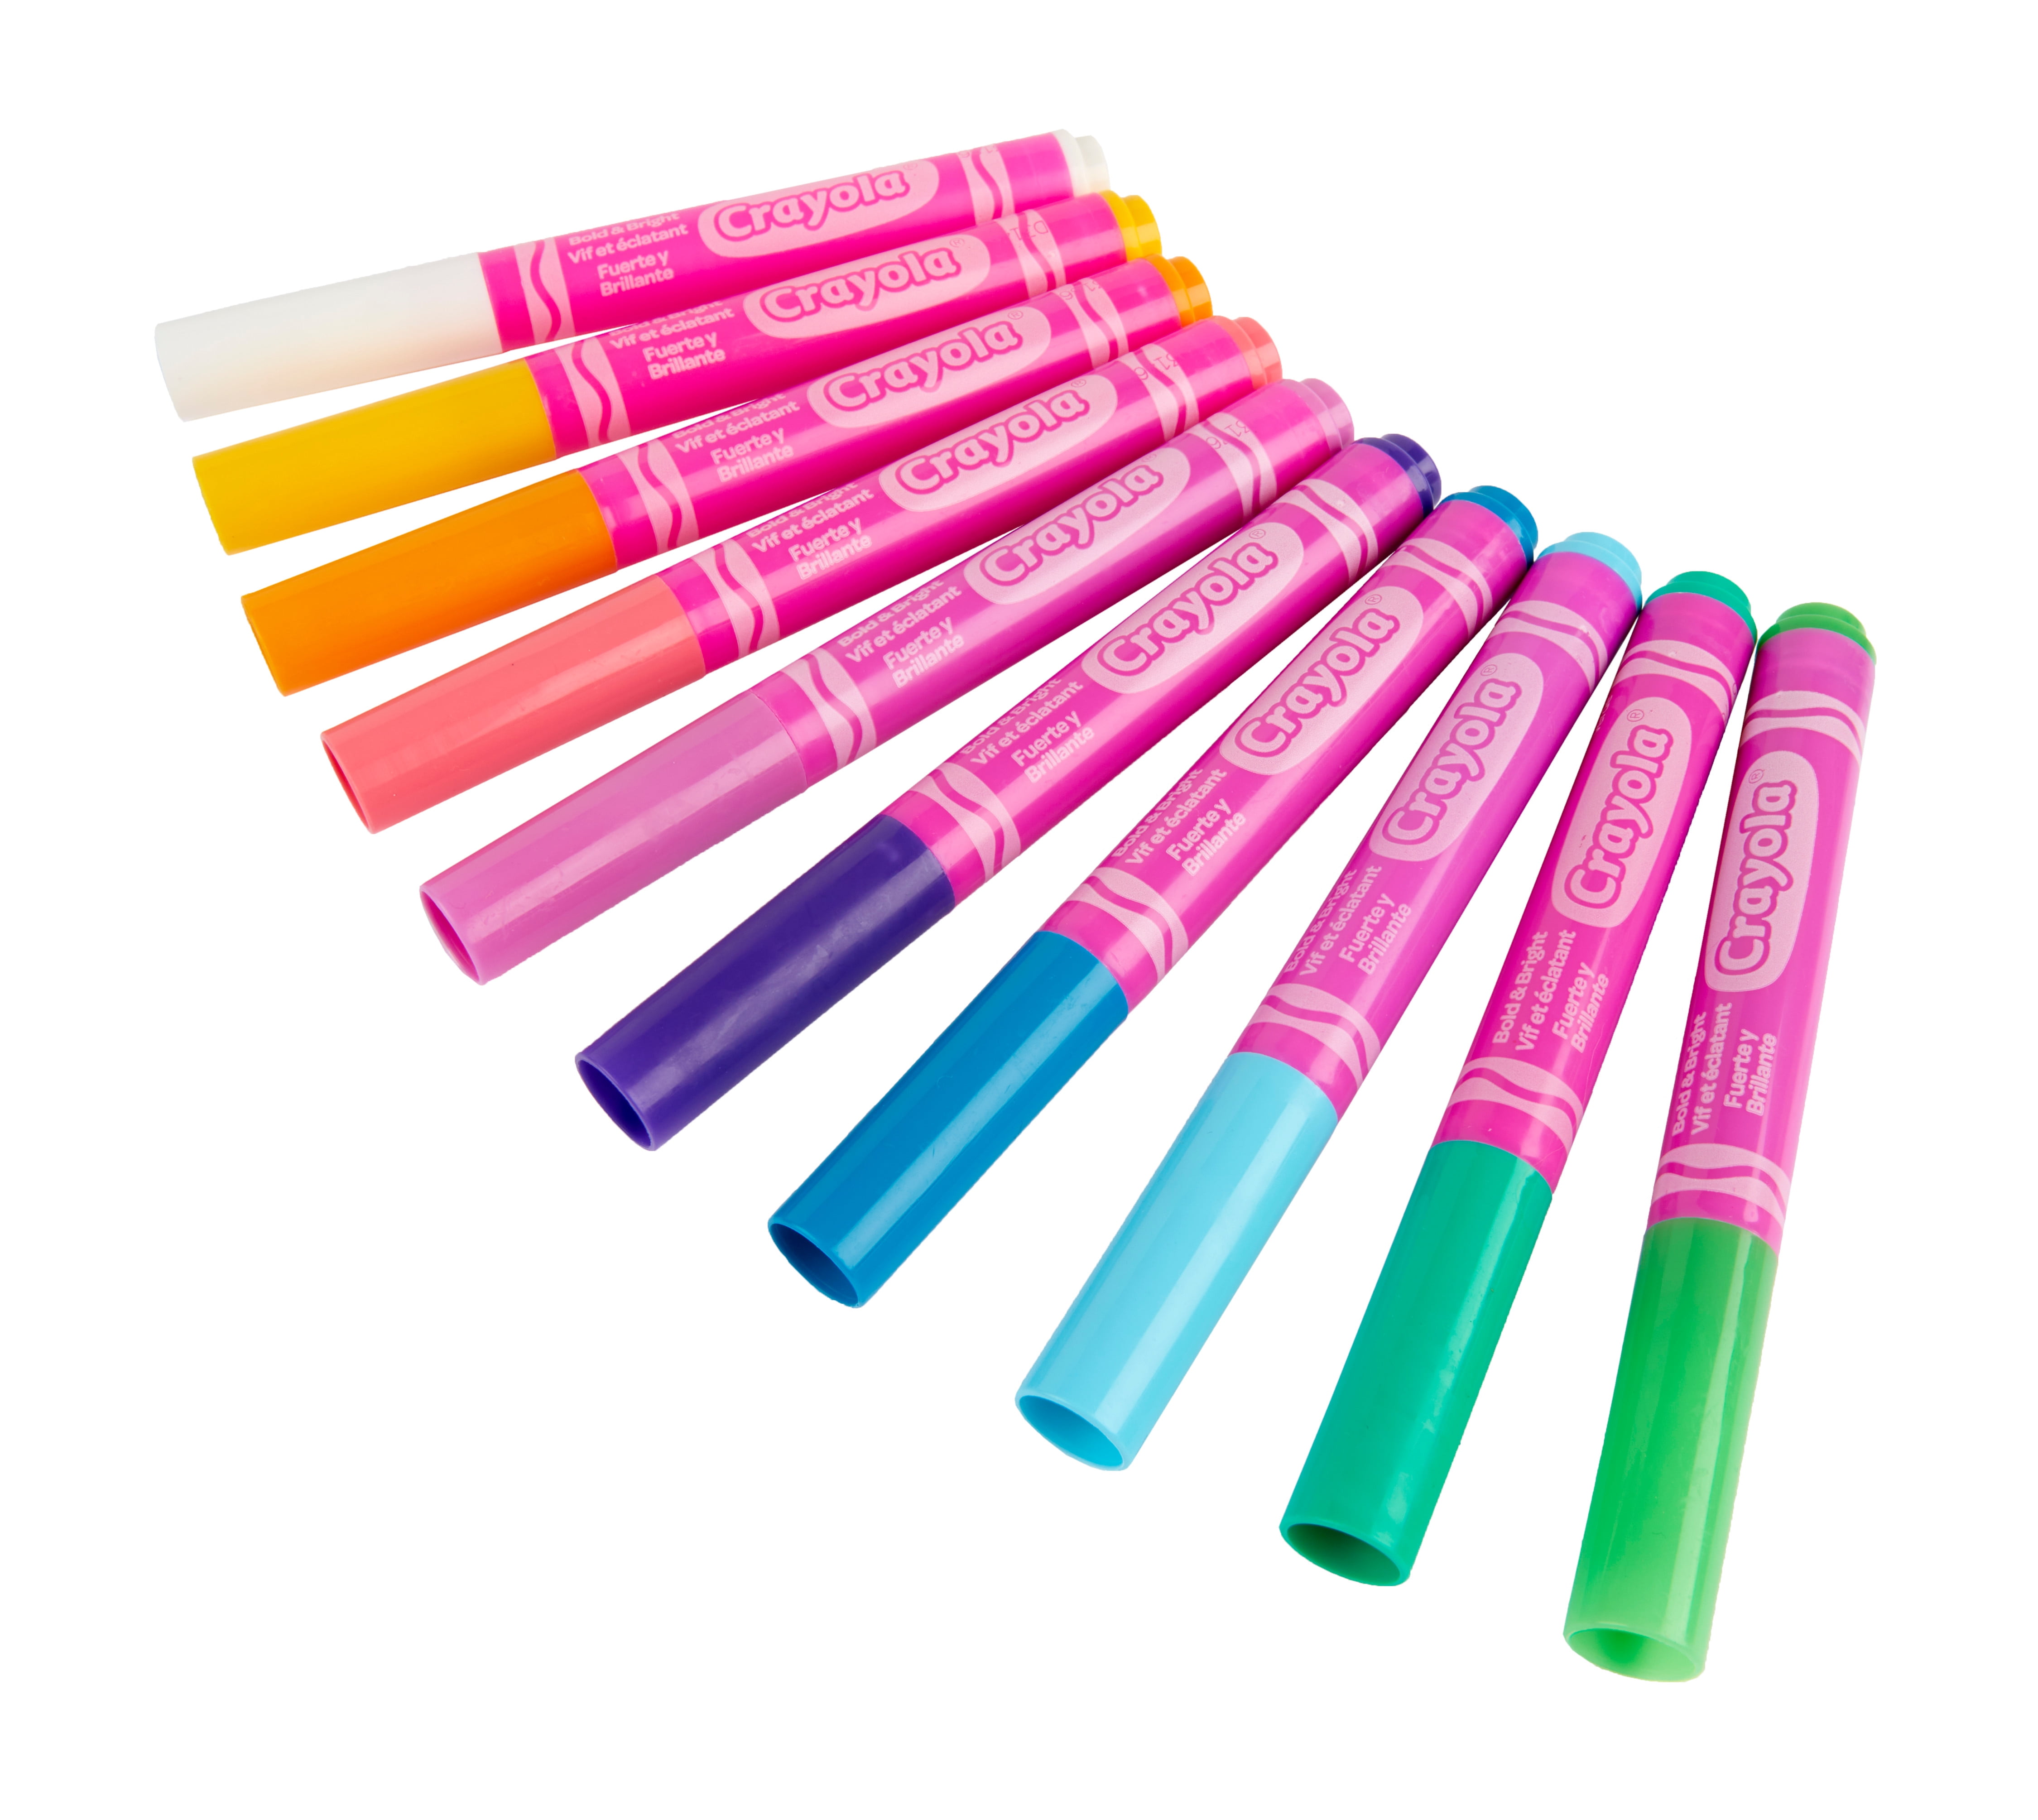 Crayola Markers, Broad Line, Assorted Bright and Bold Colors, Set of 10 -  Name Brand Overstock